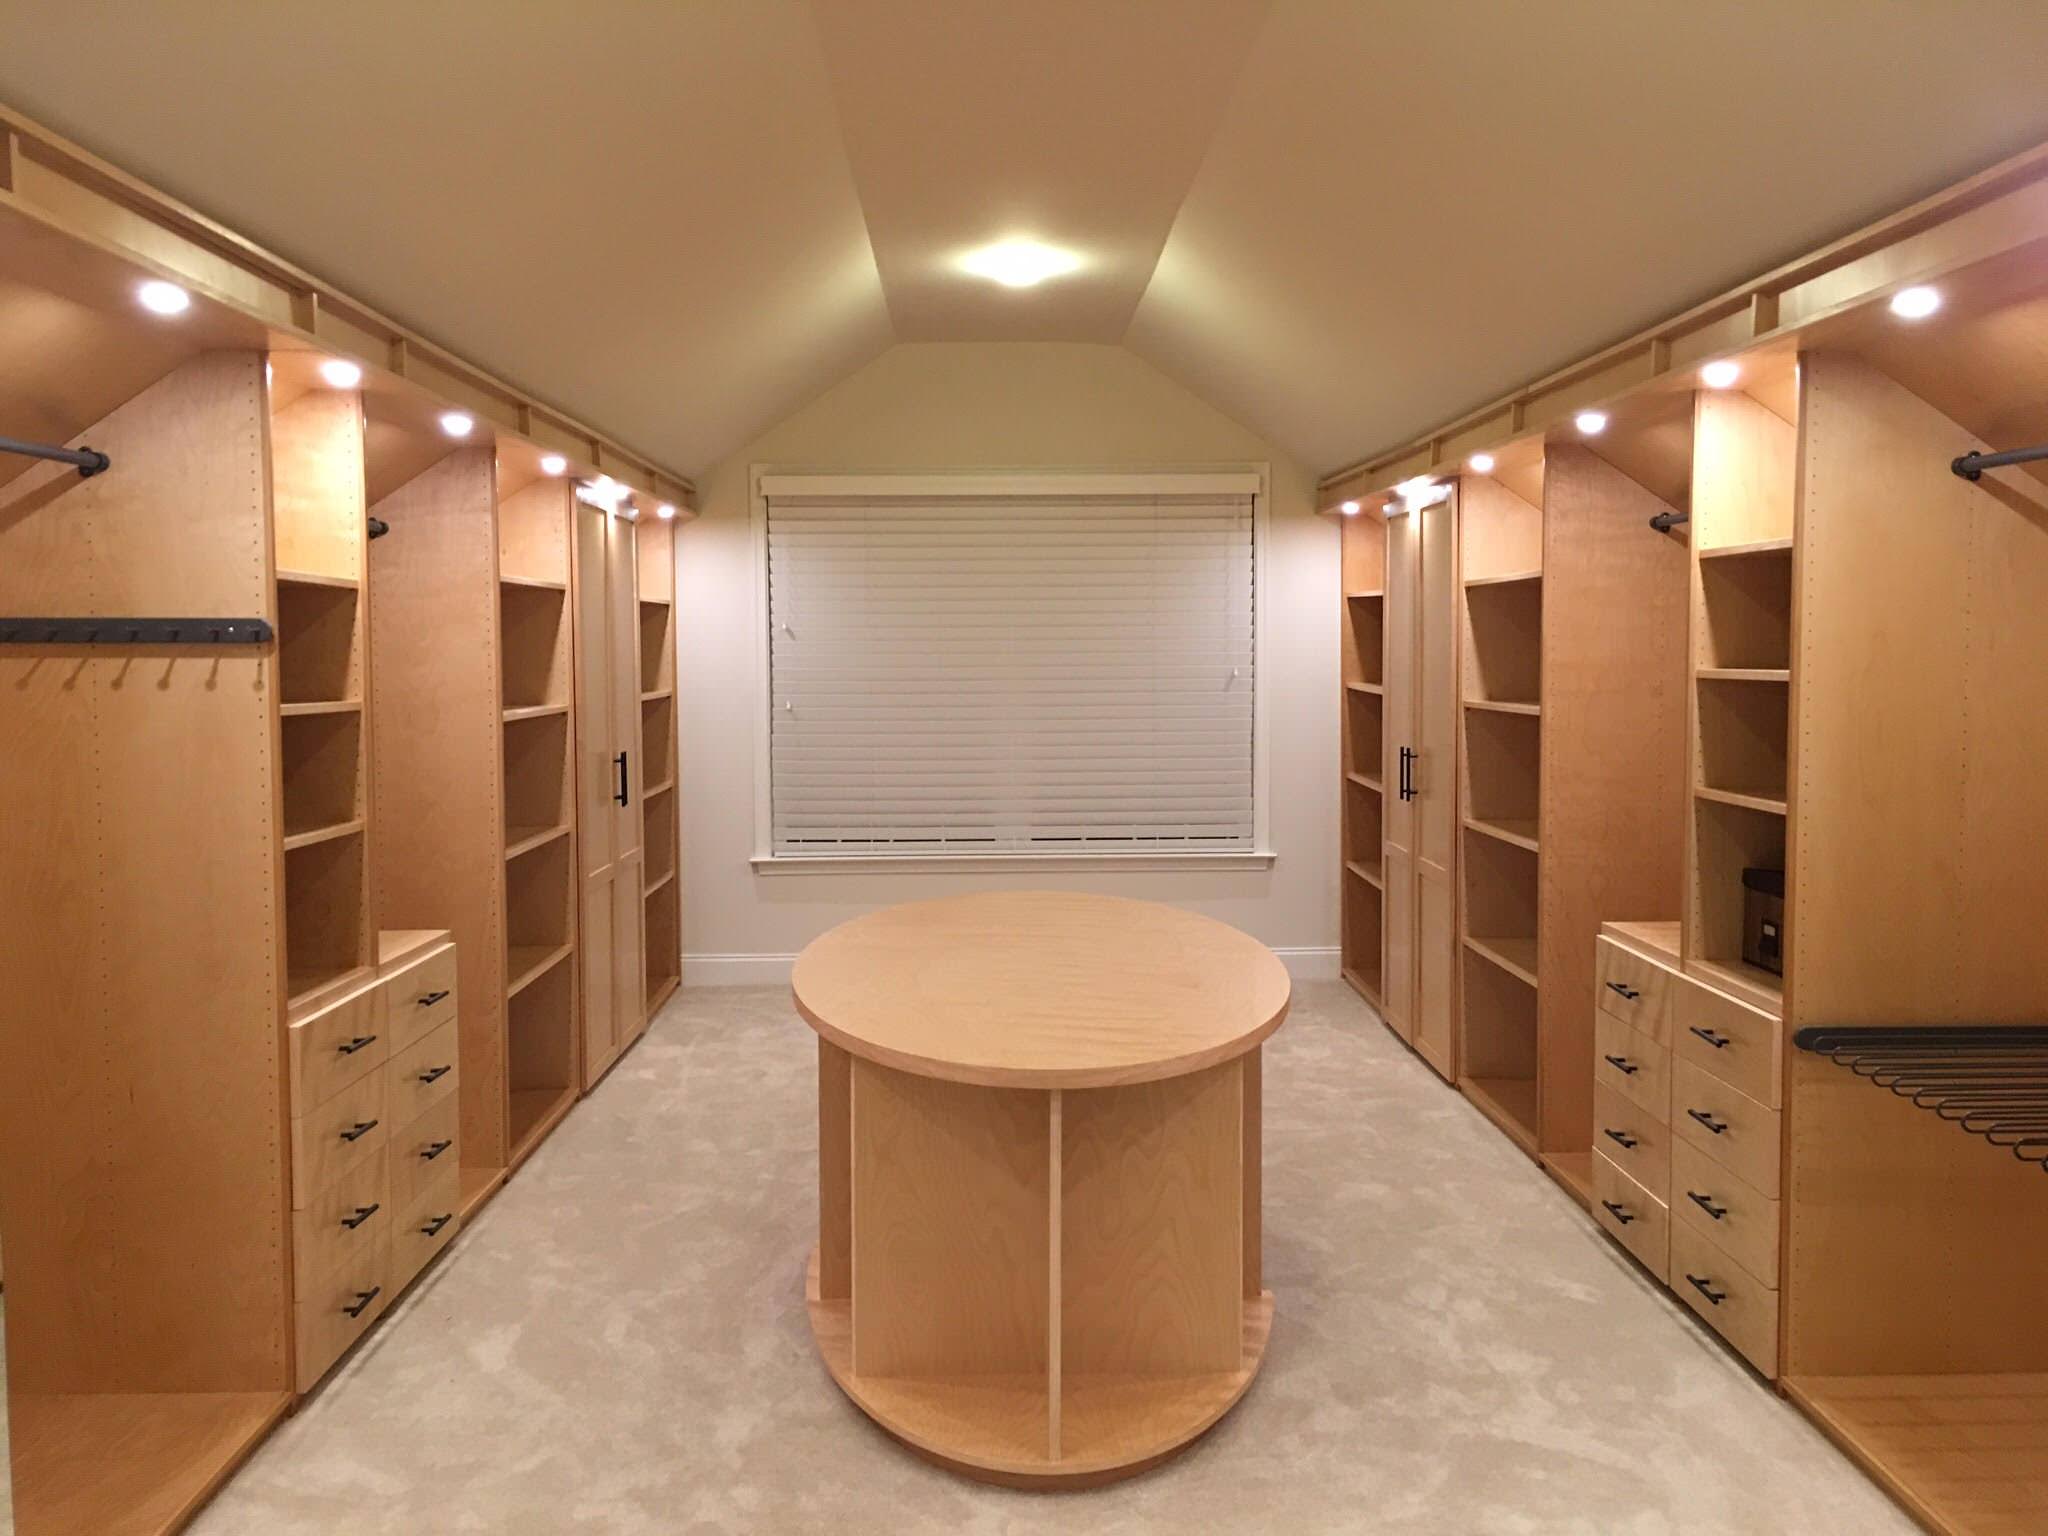 Large Walk-in Closet with Oval Island